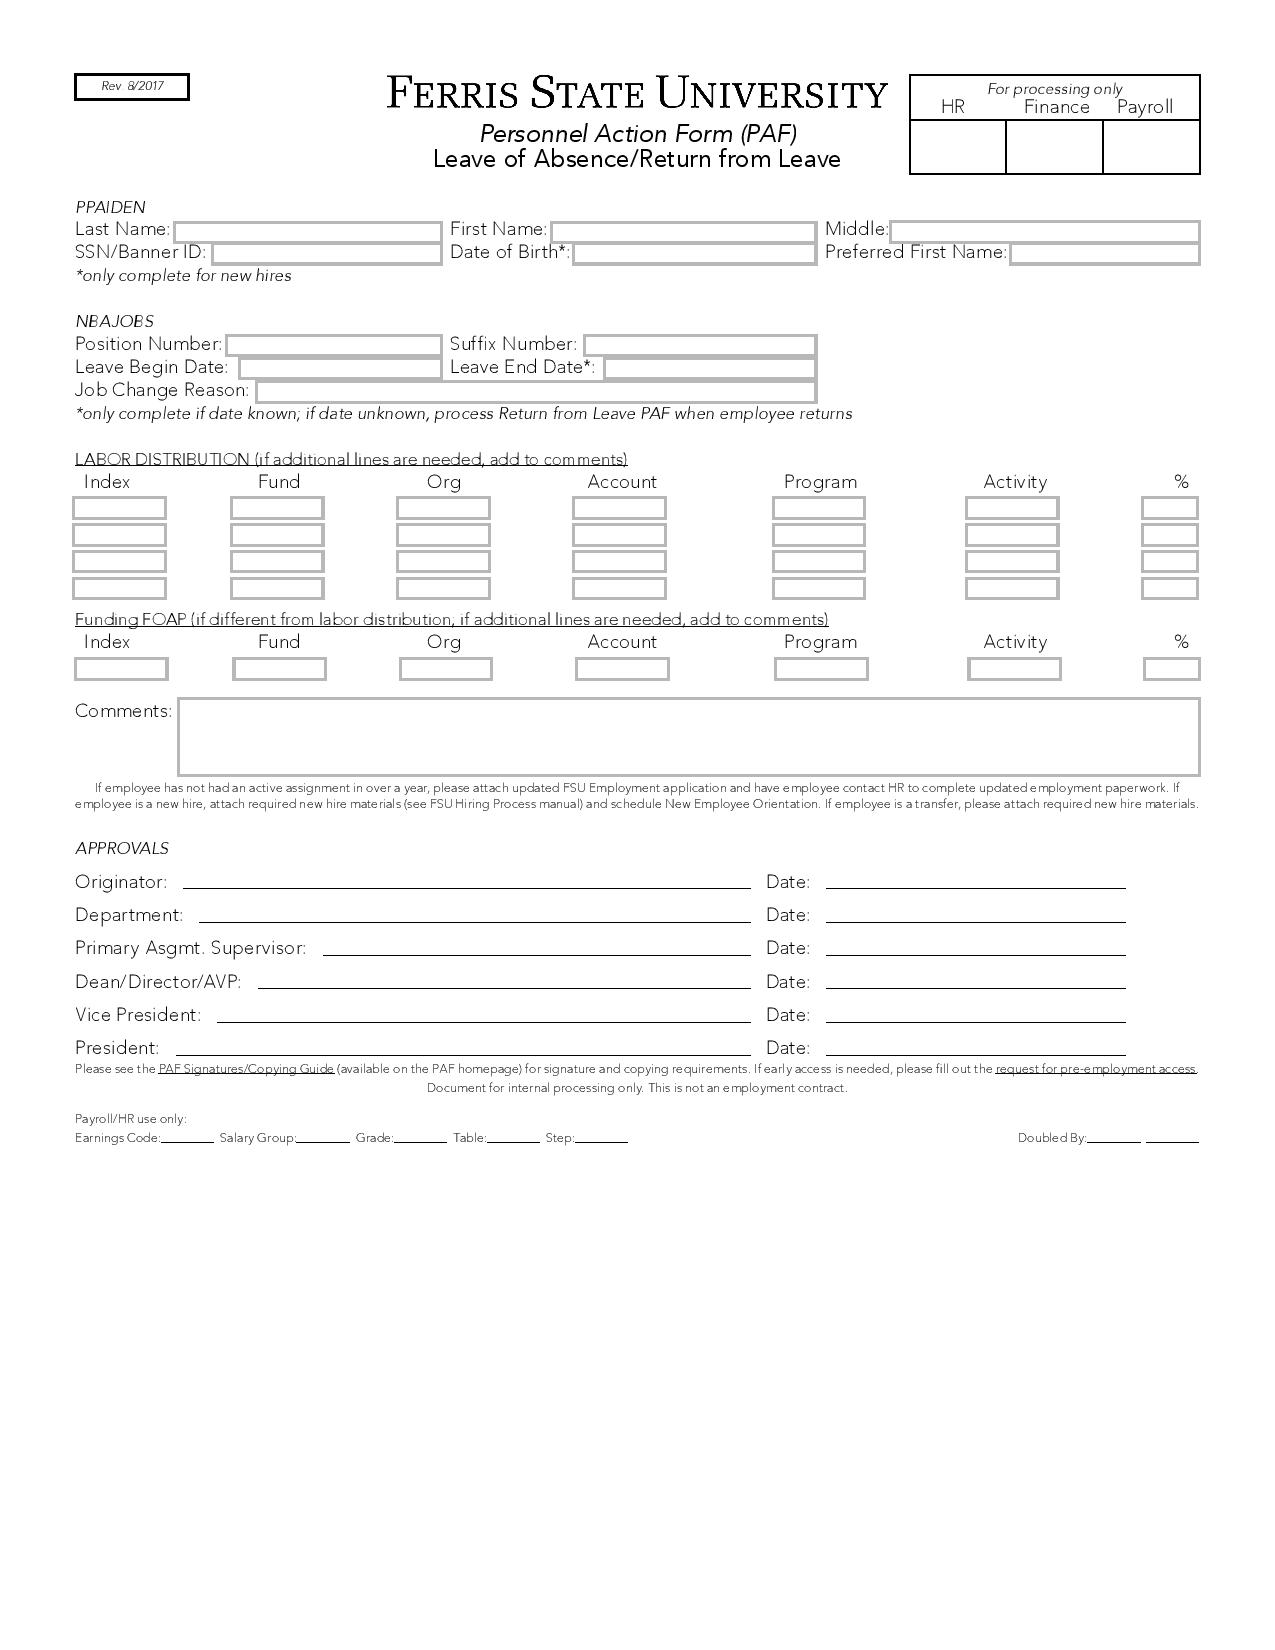 personnel action form leave of absence page 001